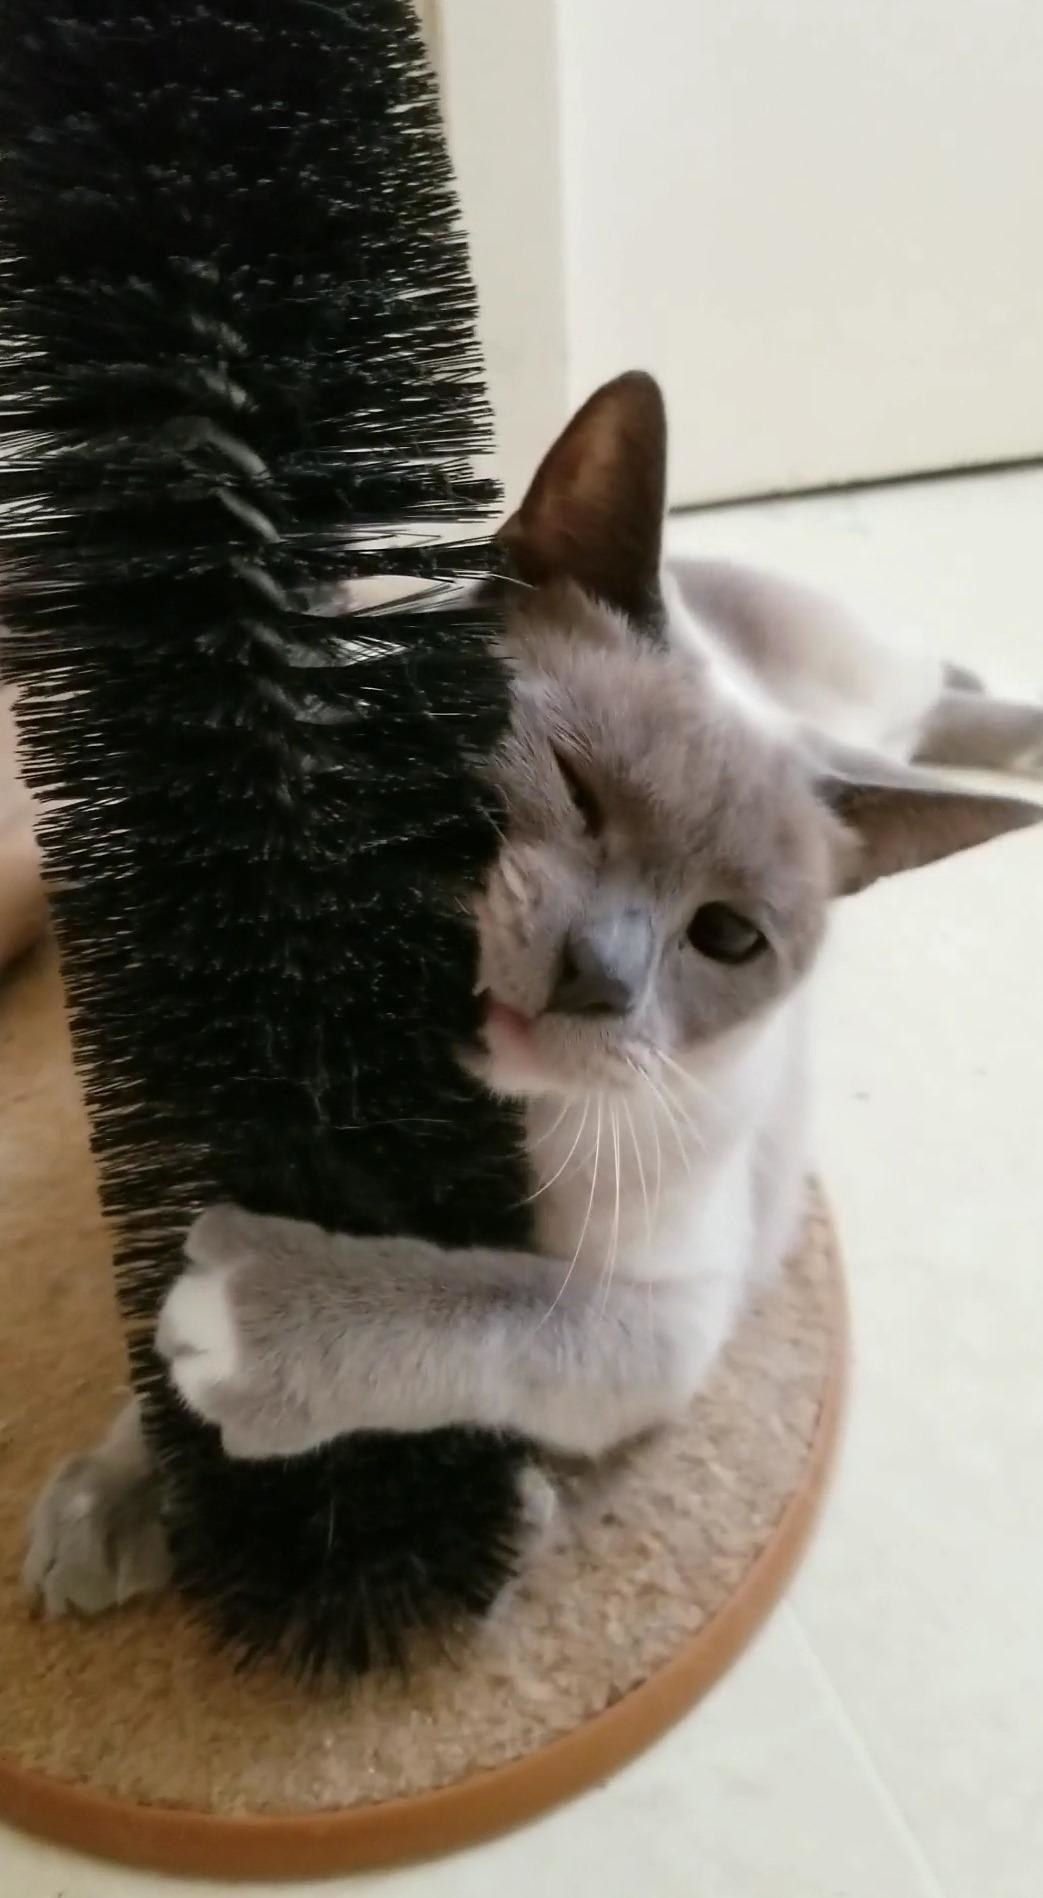 Cat Self Groomer Face Scratchers Cat Rubbing Corner Wall Grooming Dandruff Cleaning Brush Detangling Brush Petting Brush Arch Groomer Slicker Brush for Cats Kittens